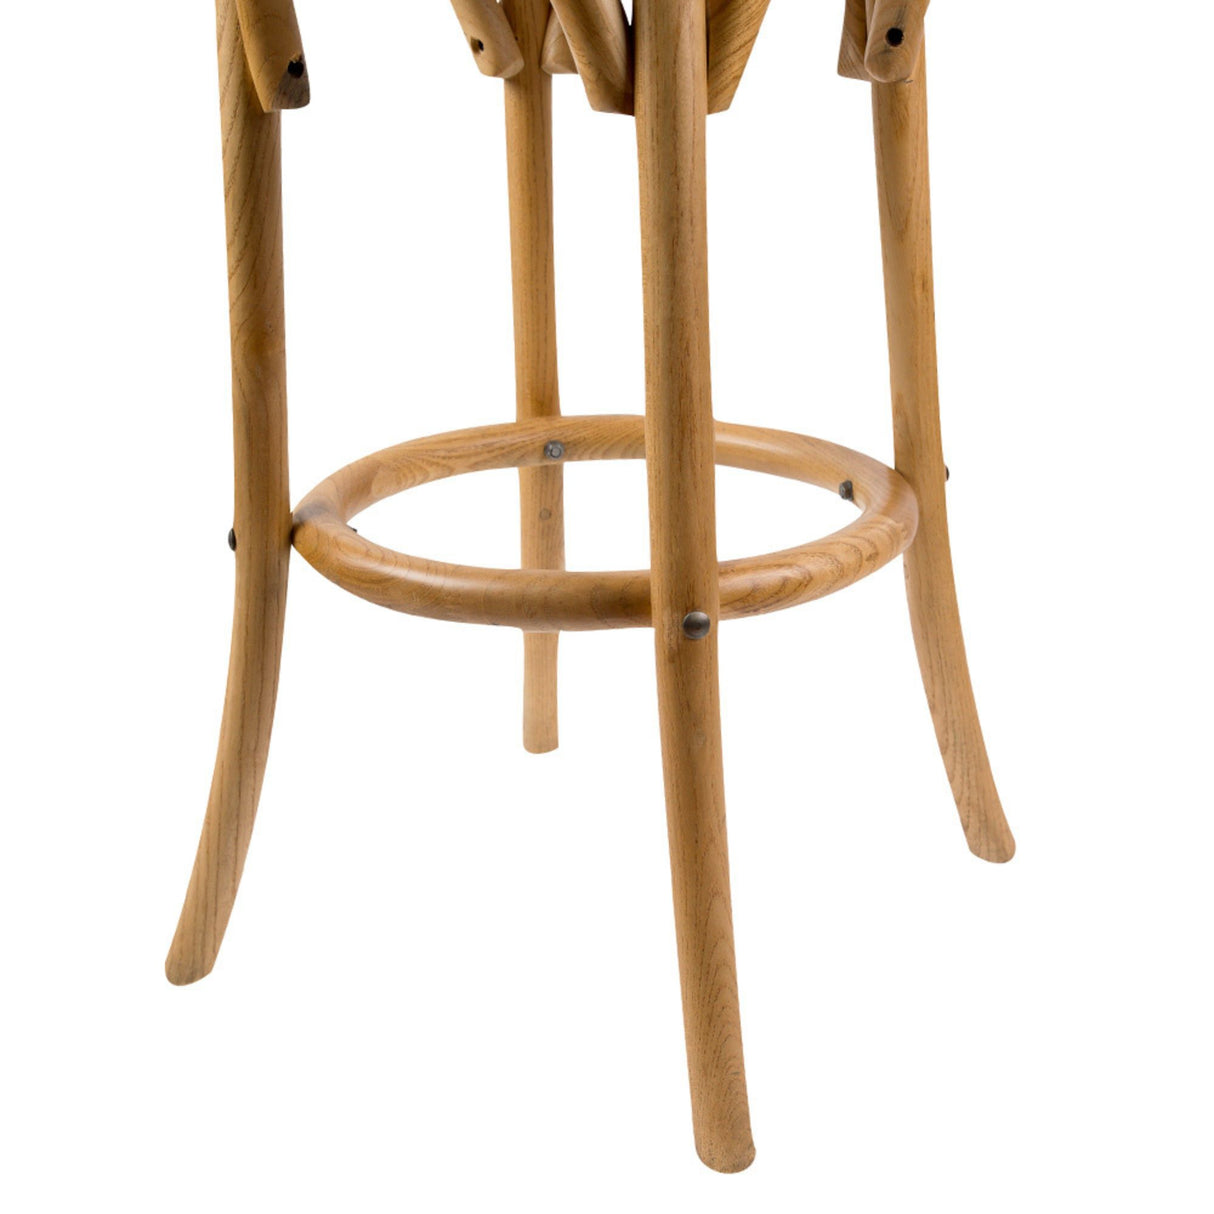 Ember 2pc Round Bar Stools Dining Stool Chair Solid Birch Timber Rattan Seat Oak